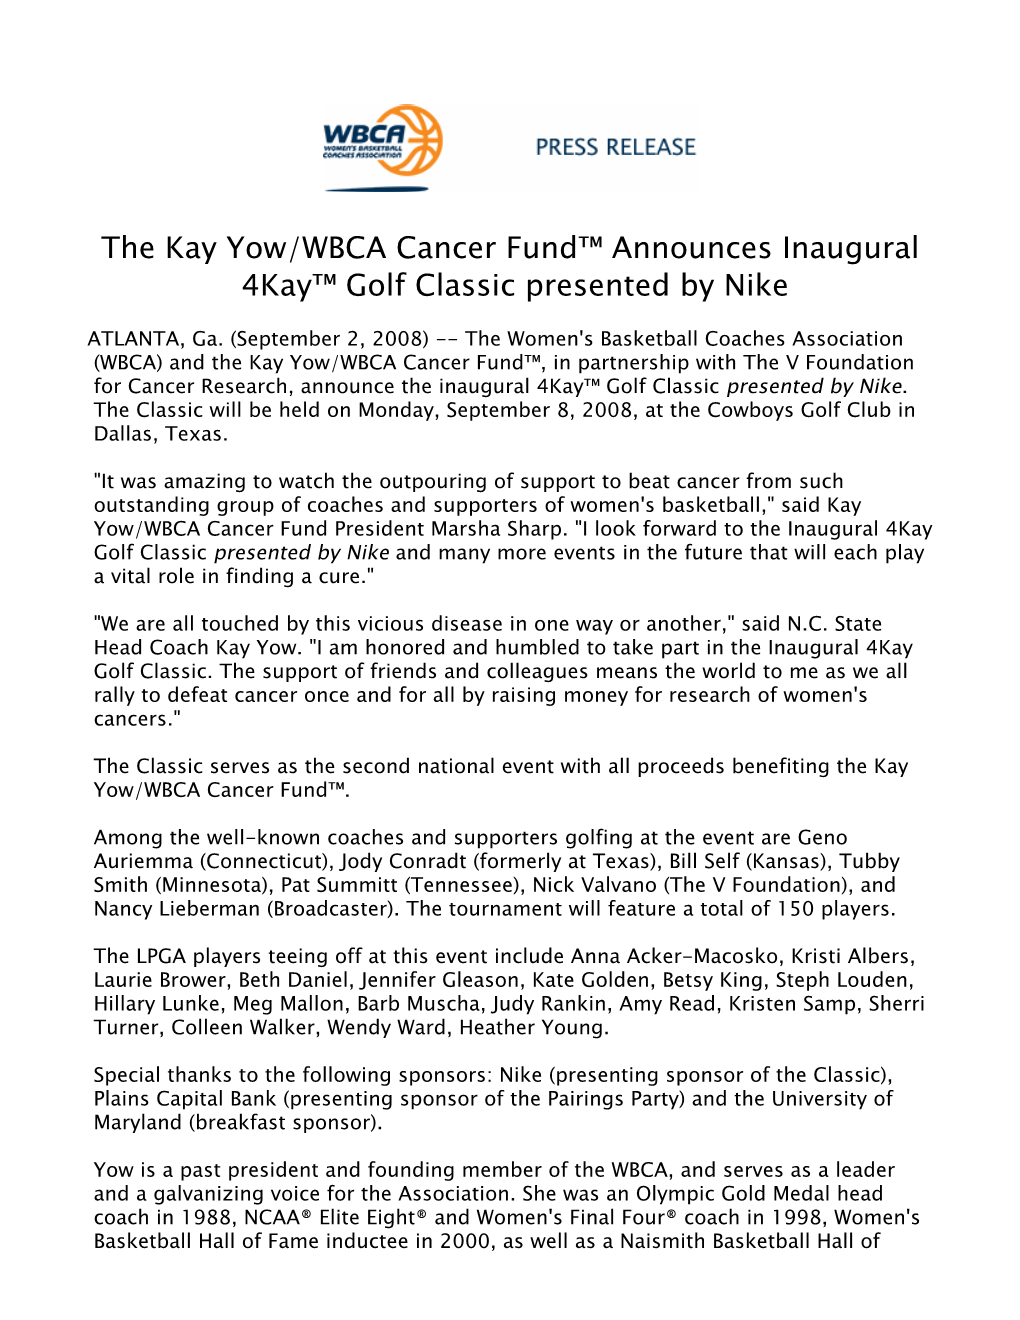 The Kay Yow/WBCA Cancer Fund™ Announces Inaugural 4Kay™ Golf Classic Presented by Nike